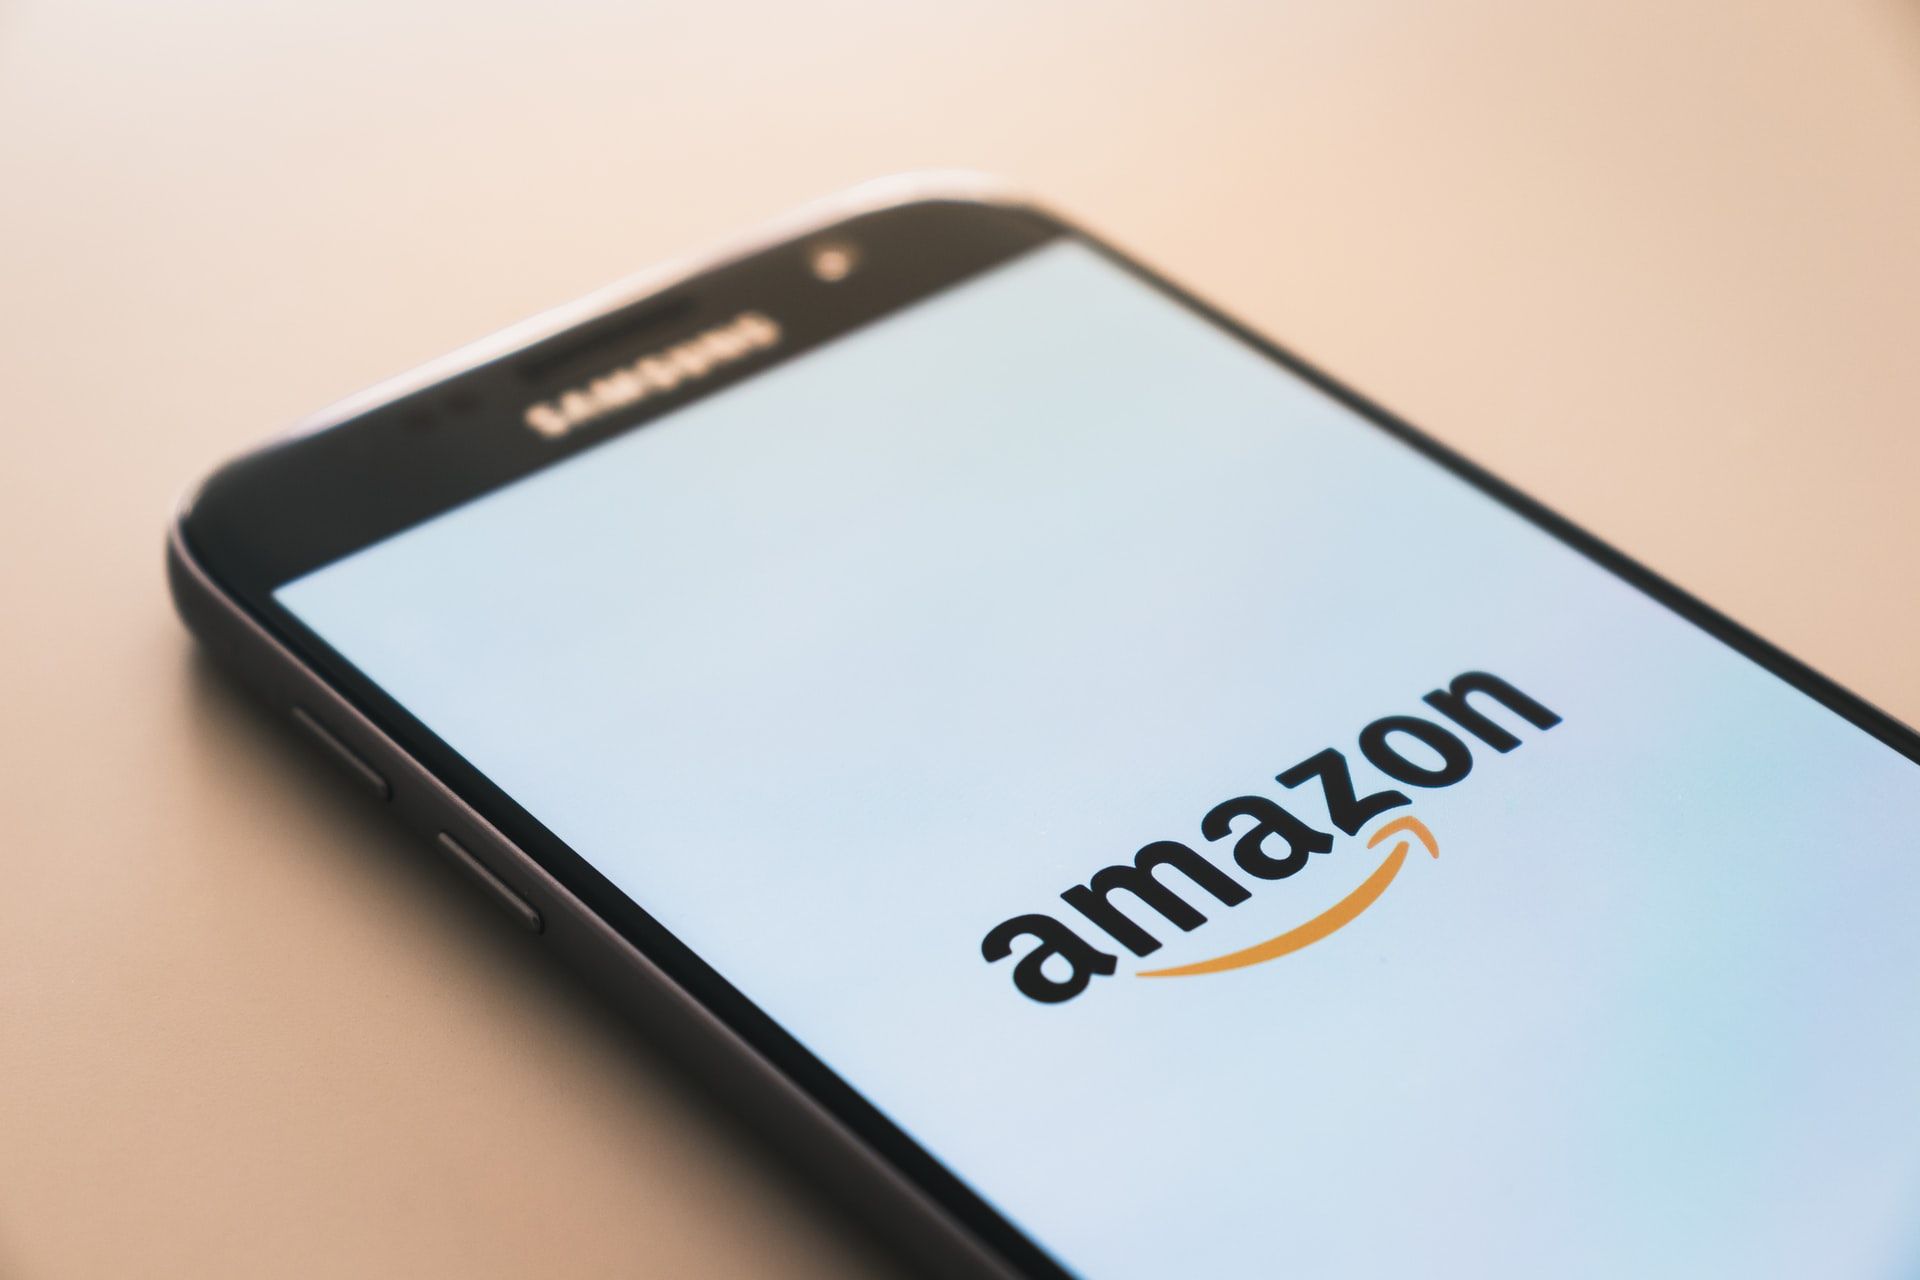 Amazon Send to phone feature